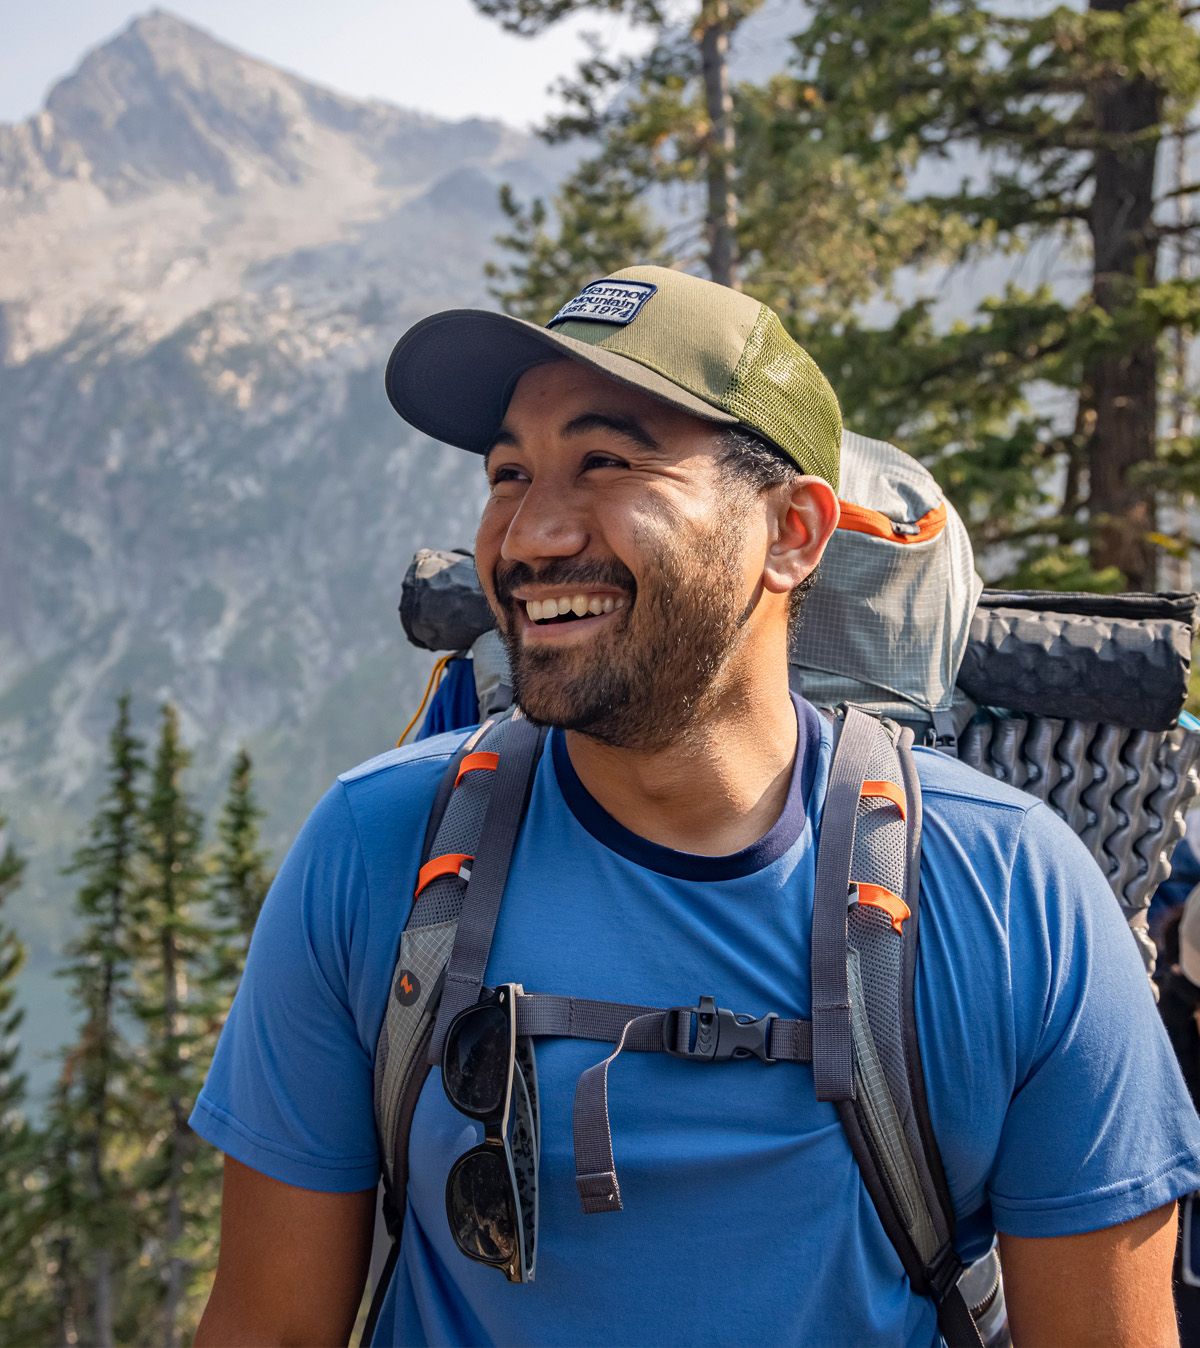 hiker on mountain wearing backpack and blue short sleeved shirt